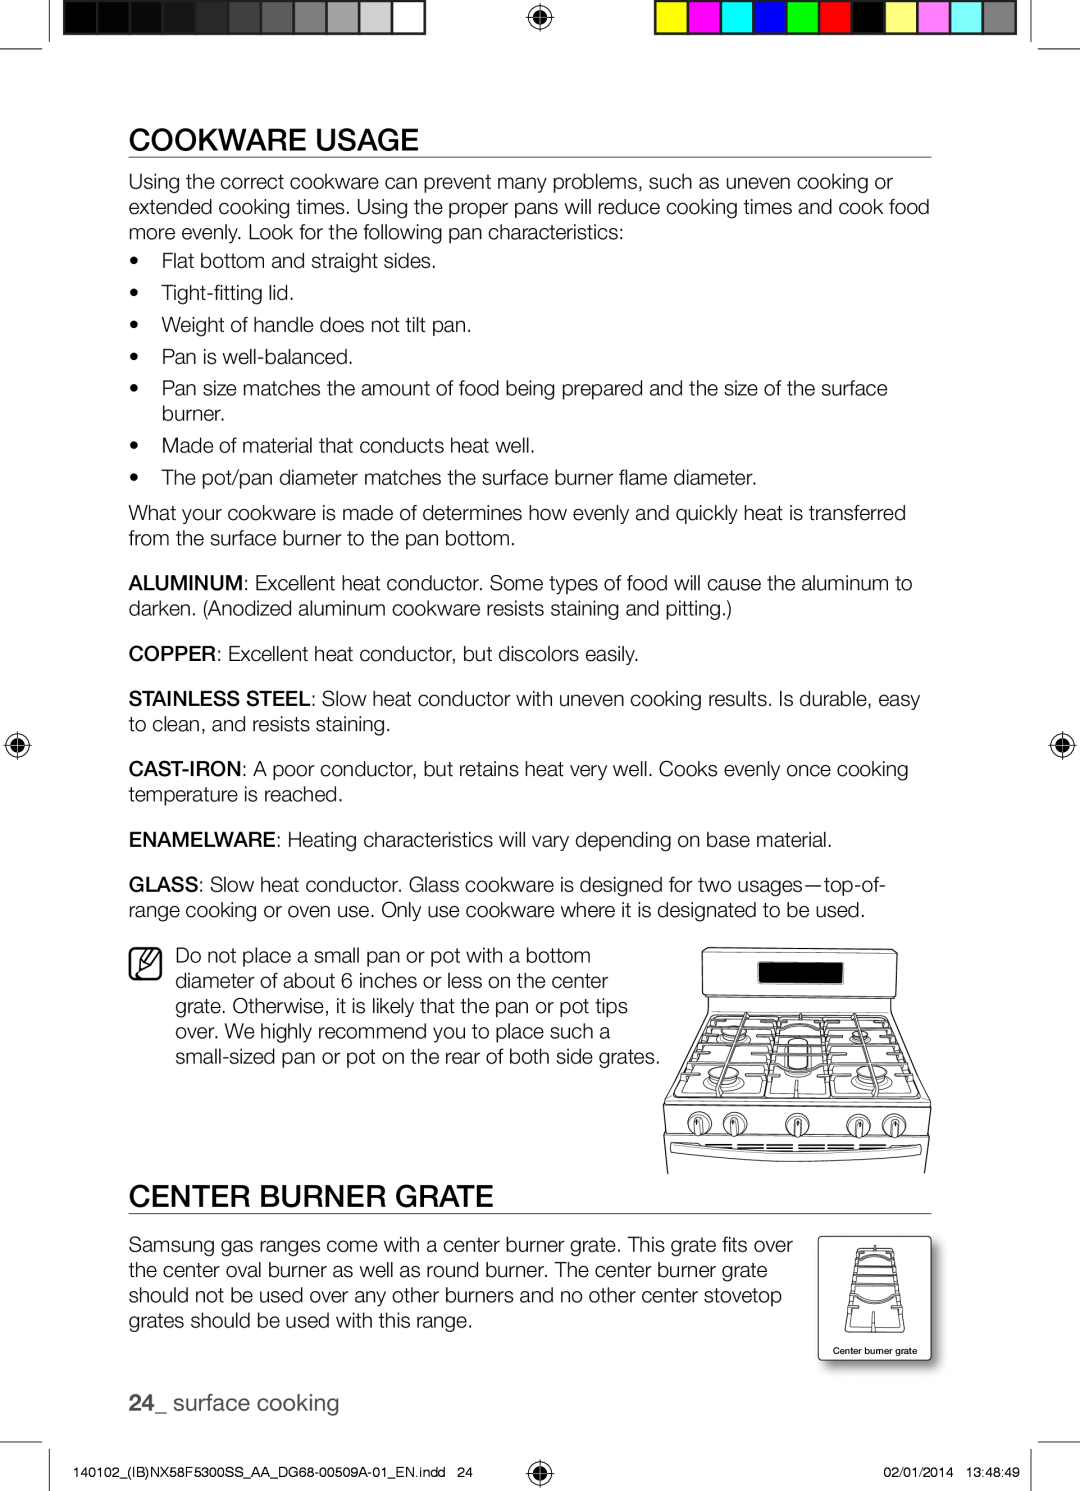 Samsung NX58F5500SW user manual Cookware Usage, Center Burner Grate, surface cooking 